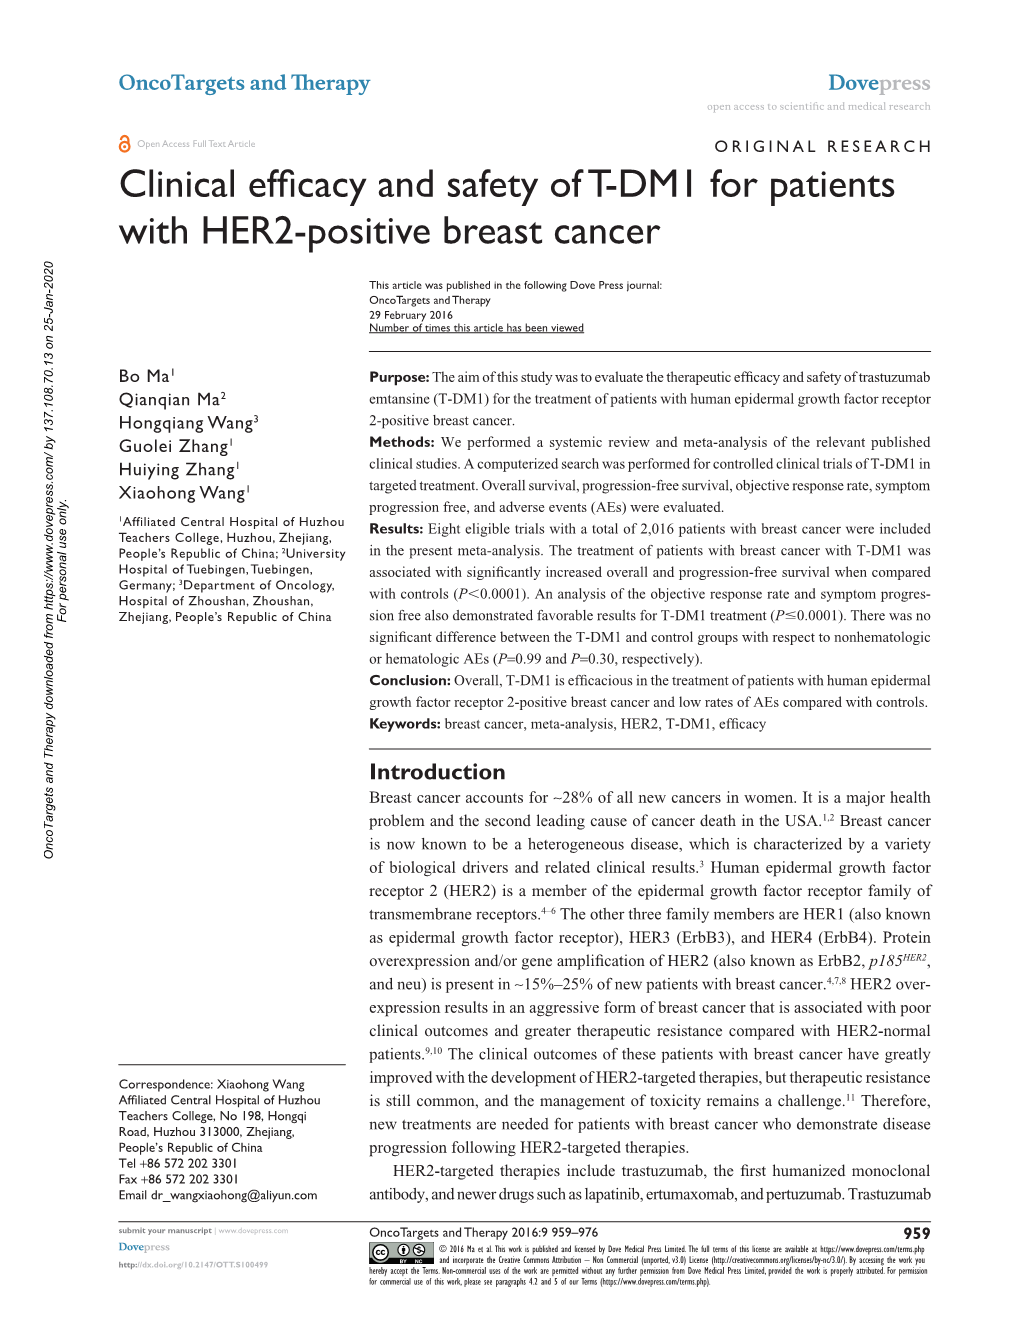 Clinical Efficacy and Safety of T-DM1 for Patients with HER2-Positive Breast Cancer